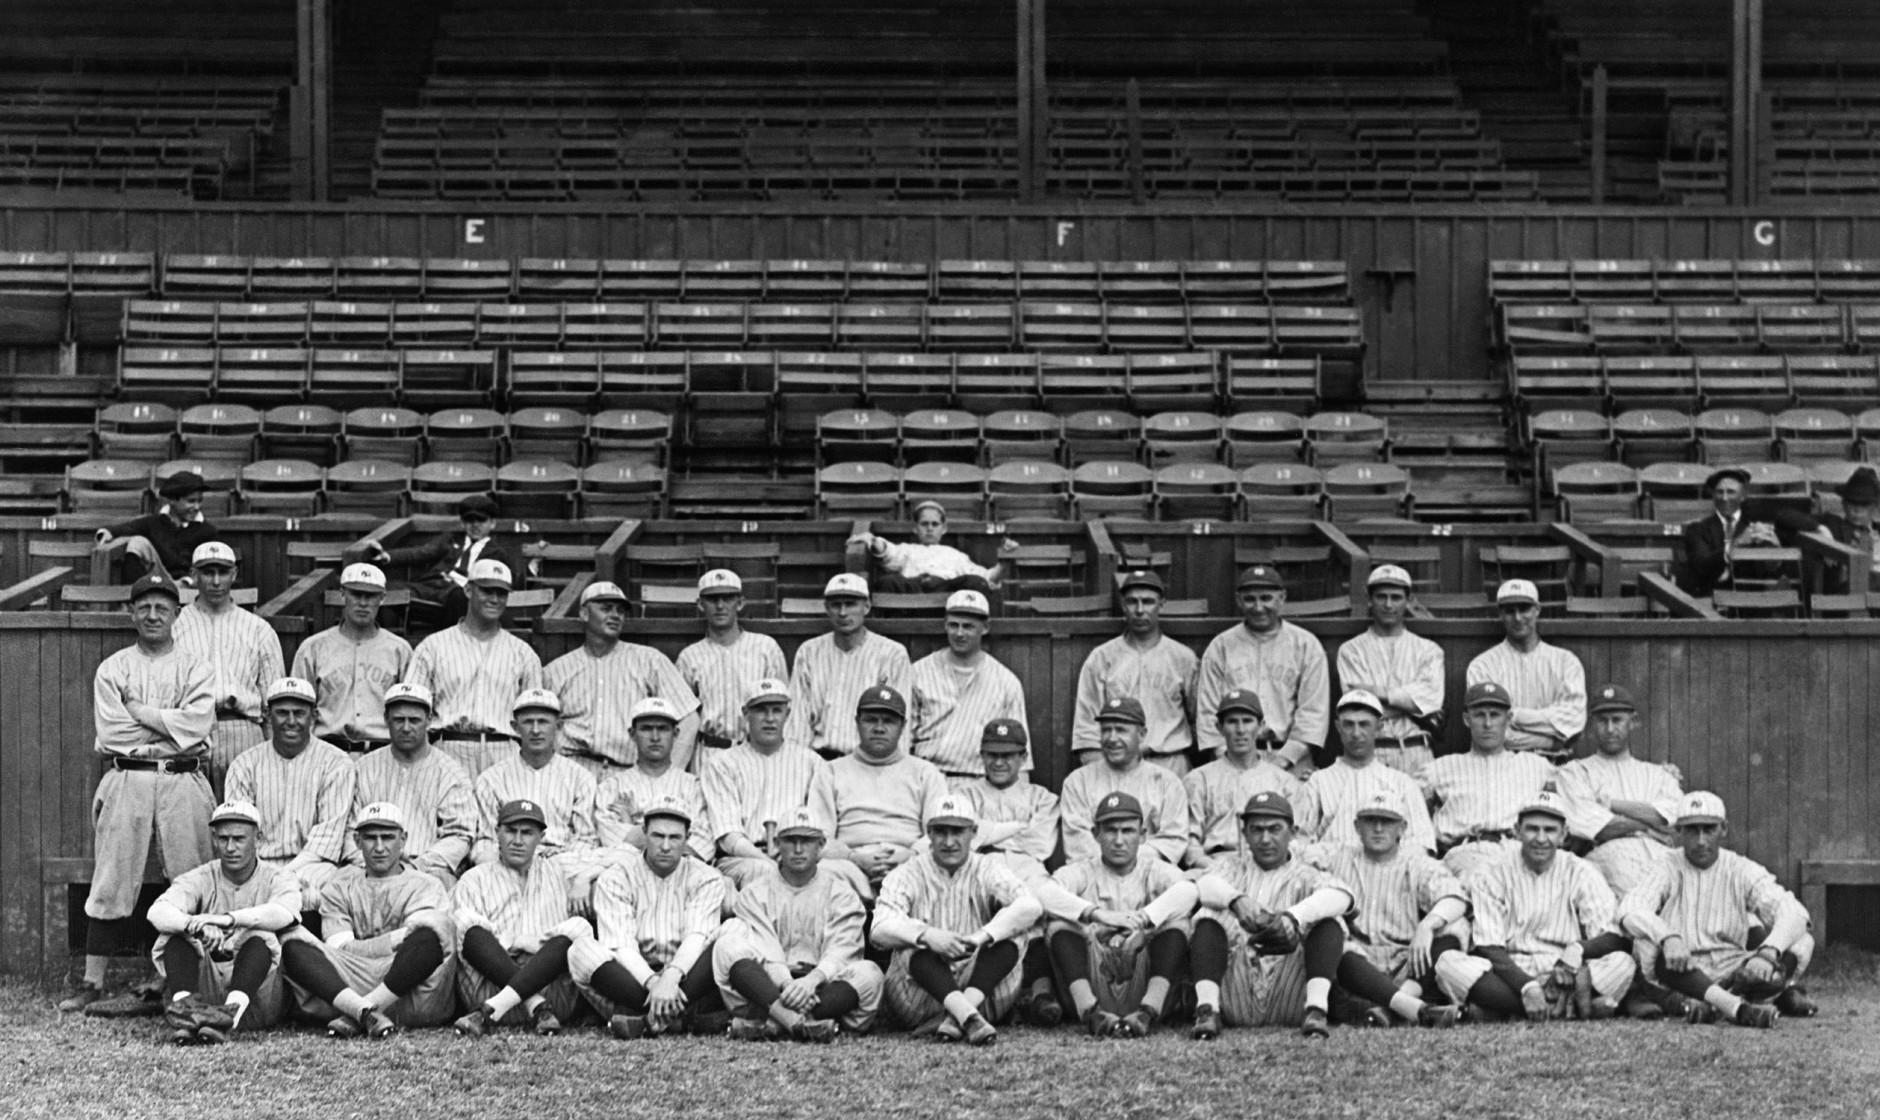 The 1921 New York Yankees, the first to win an AL pennant, pose for a team photo during Spring Training in Louisiana. (AP Photo/Library Of Congress)